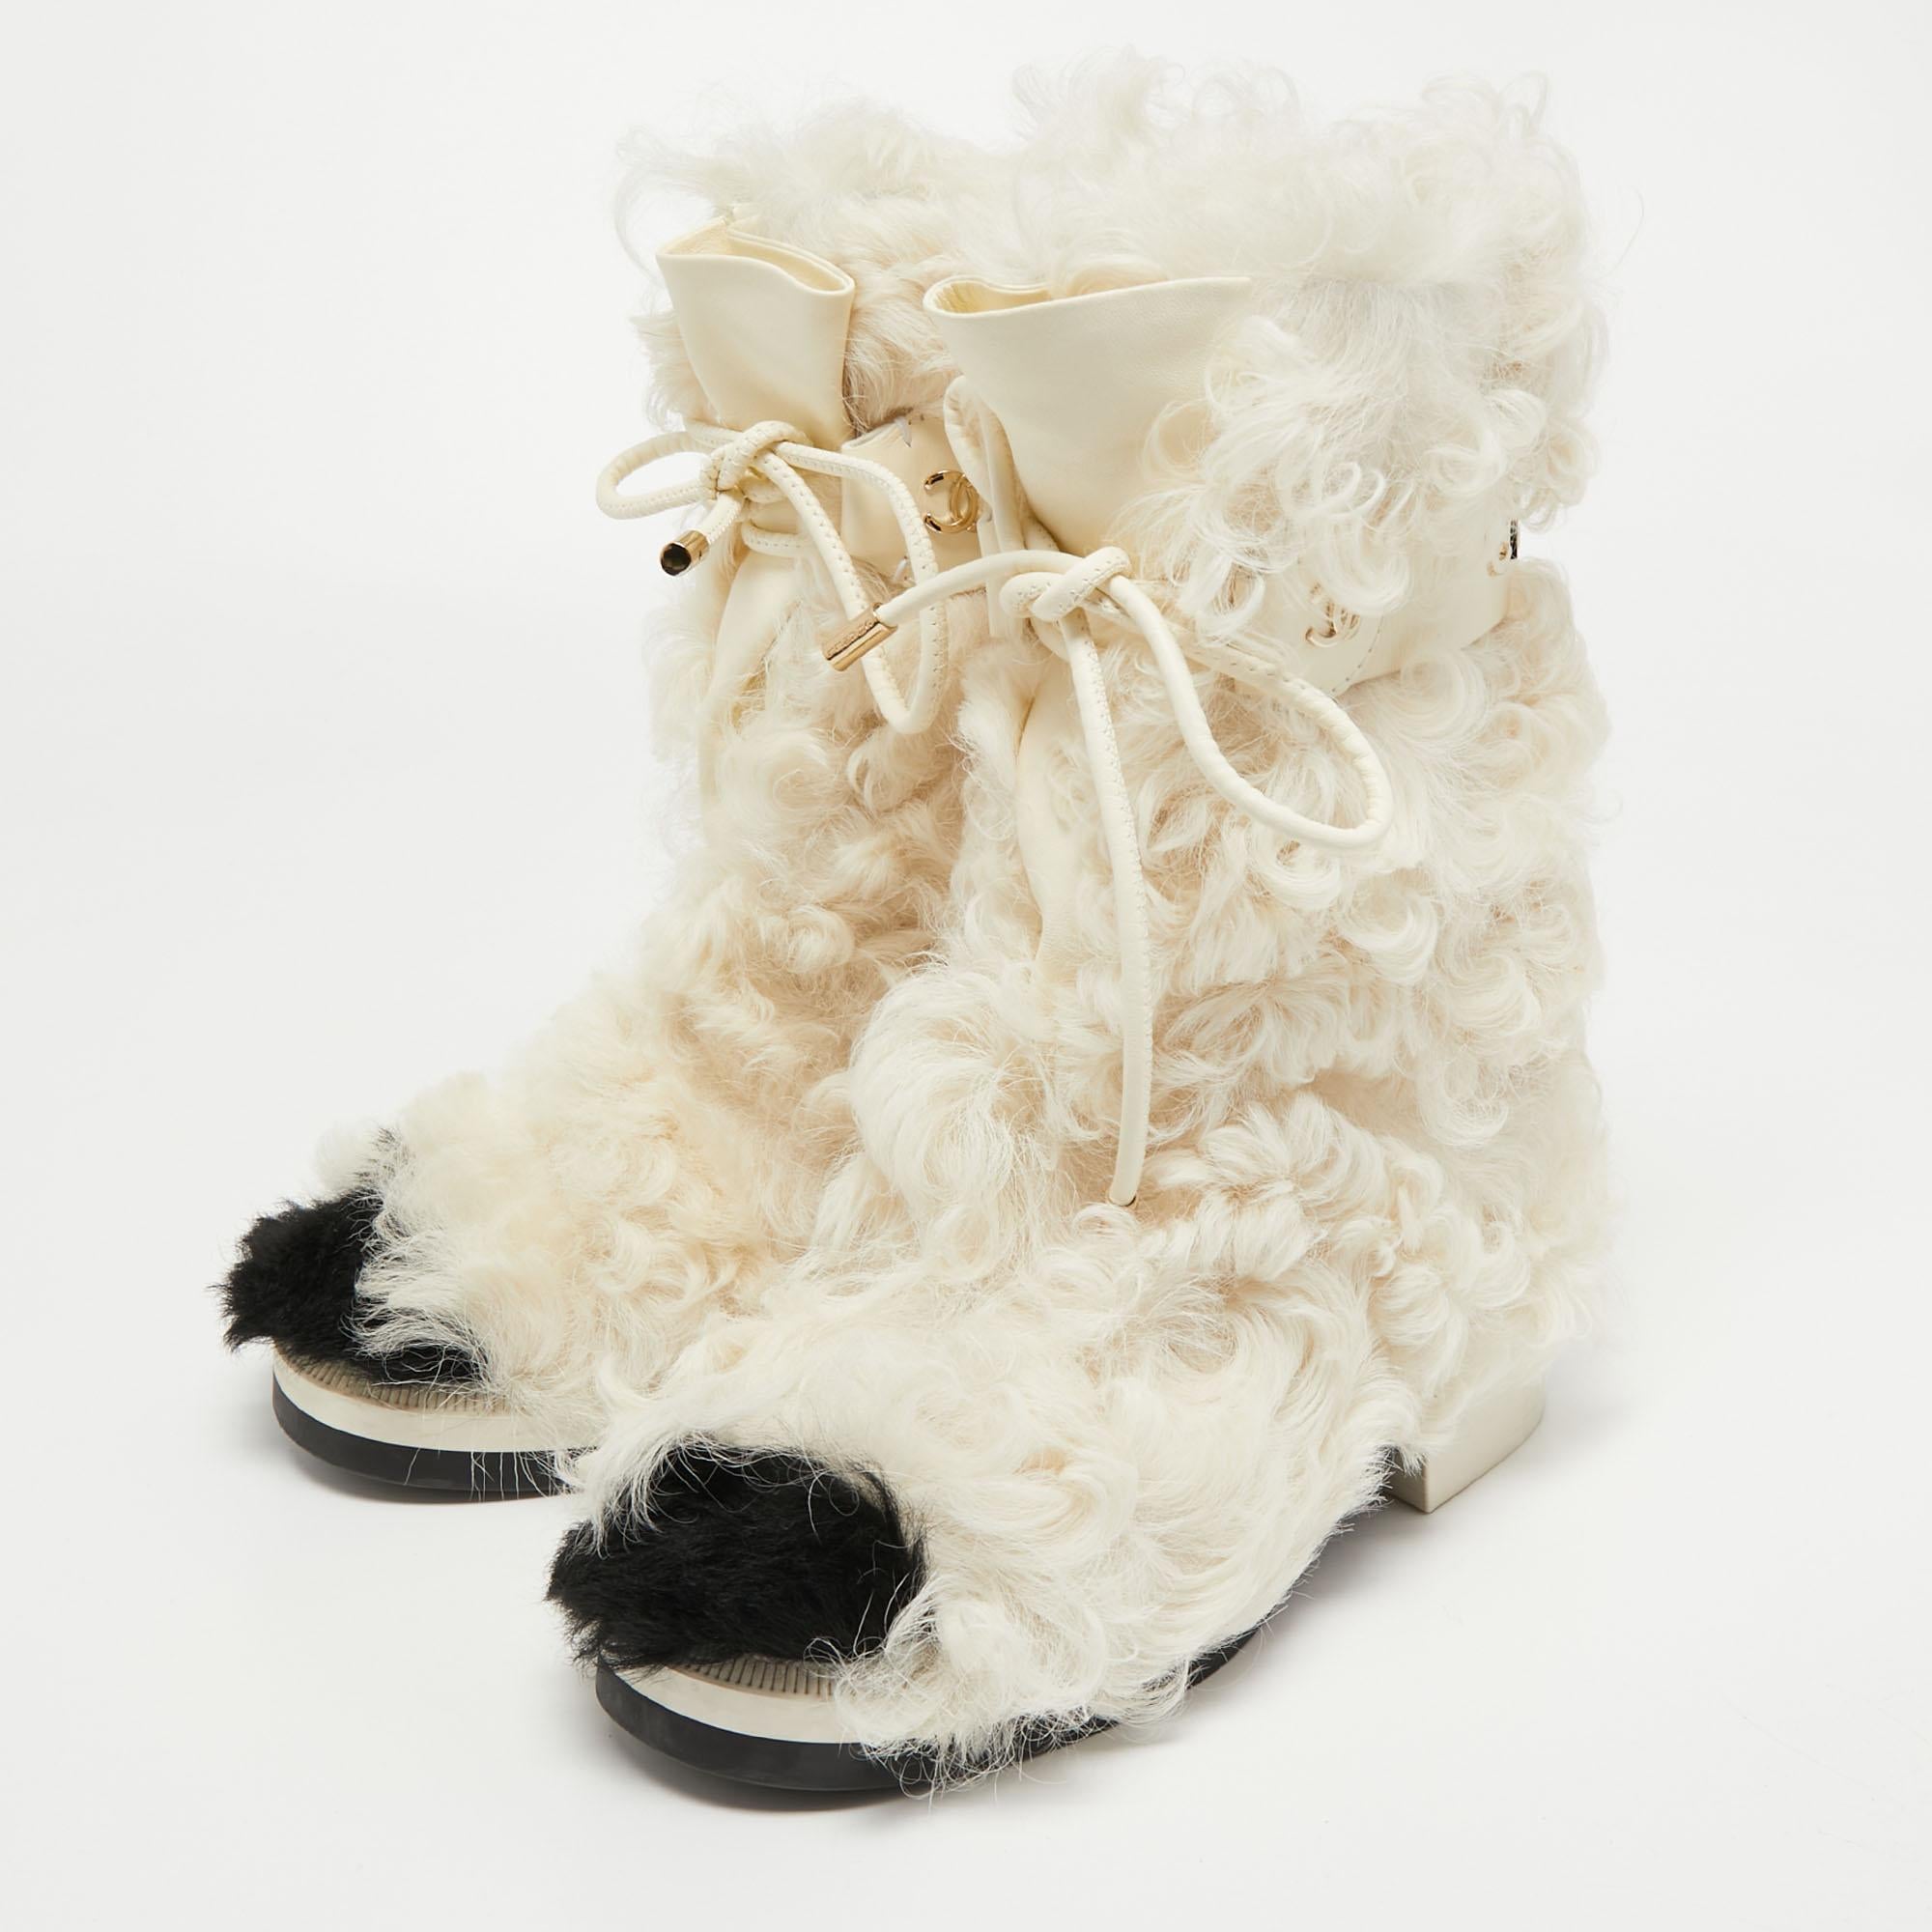 Chanel White/Black Shearling Fur Calf Length Boots Size 38 1